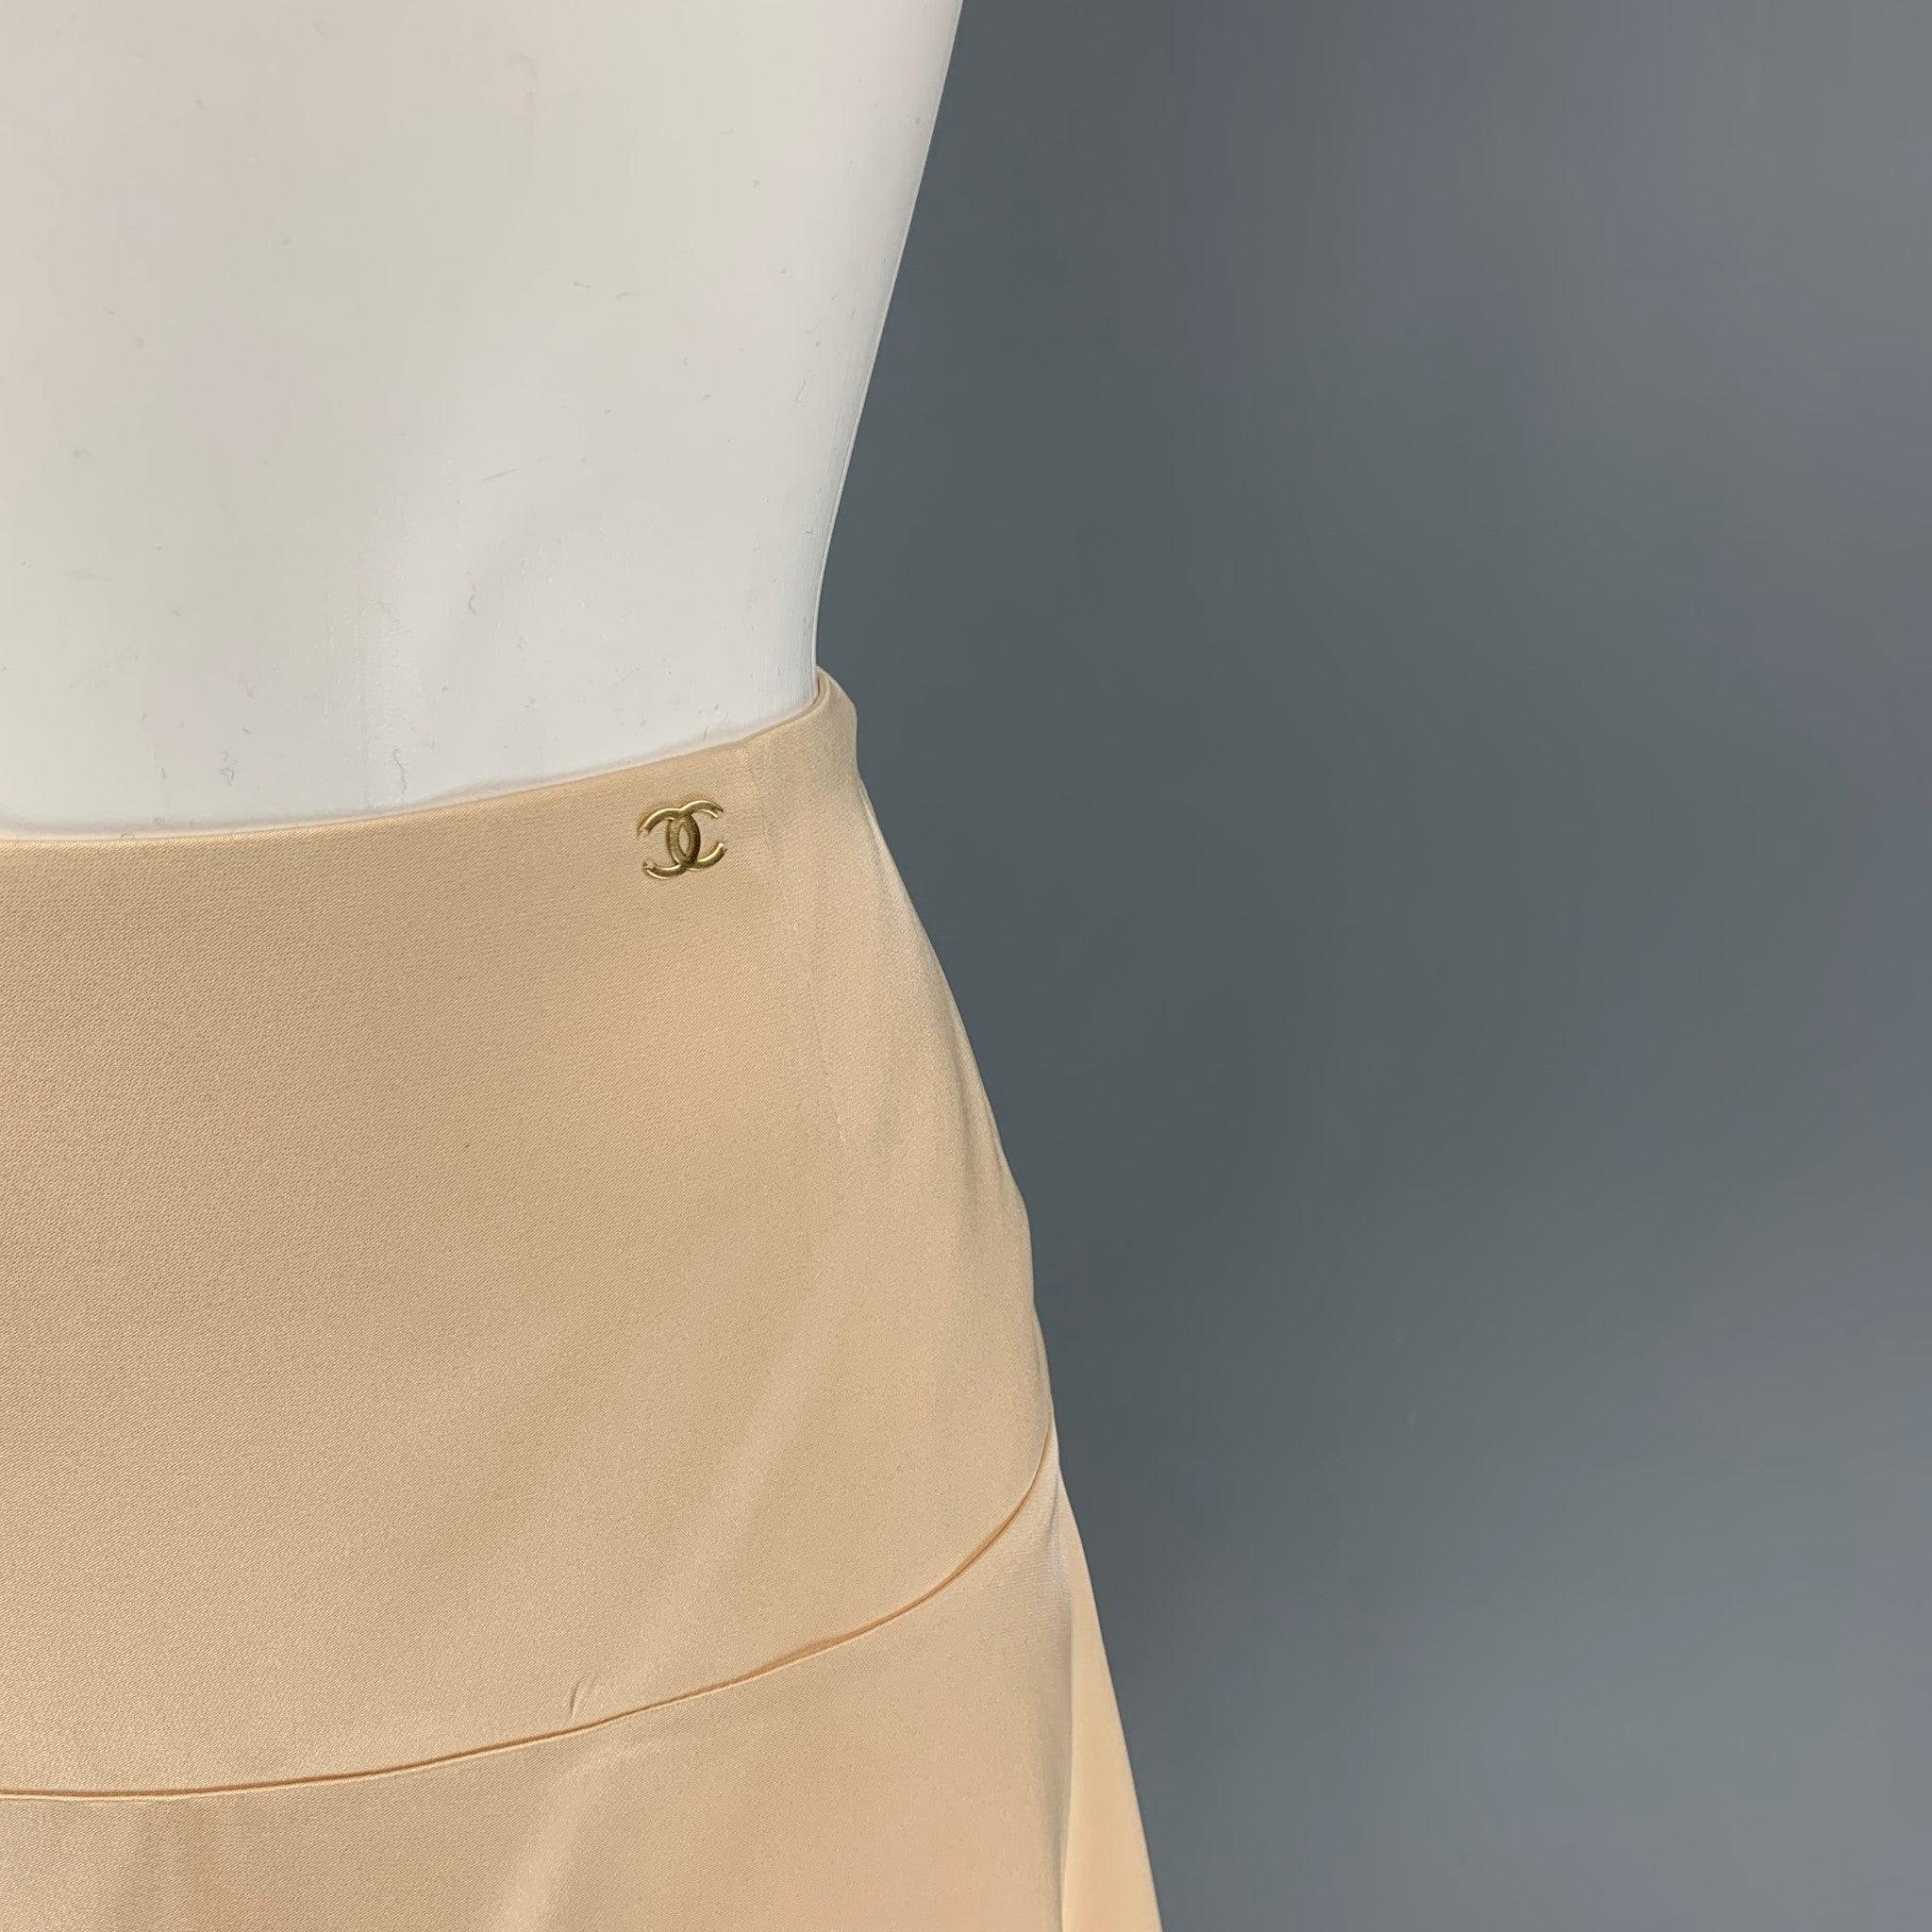 CHANEL skirt comes in a champagne silk featuring a layered style, gold tone logo detail, and a back zip up closure. Made in France.
Very Good
Pre-Owned Condition. 

Marked:   AI098 034 / 38 

Measurements: 
  Waist:
28 inches  Hip: 40 inches 